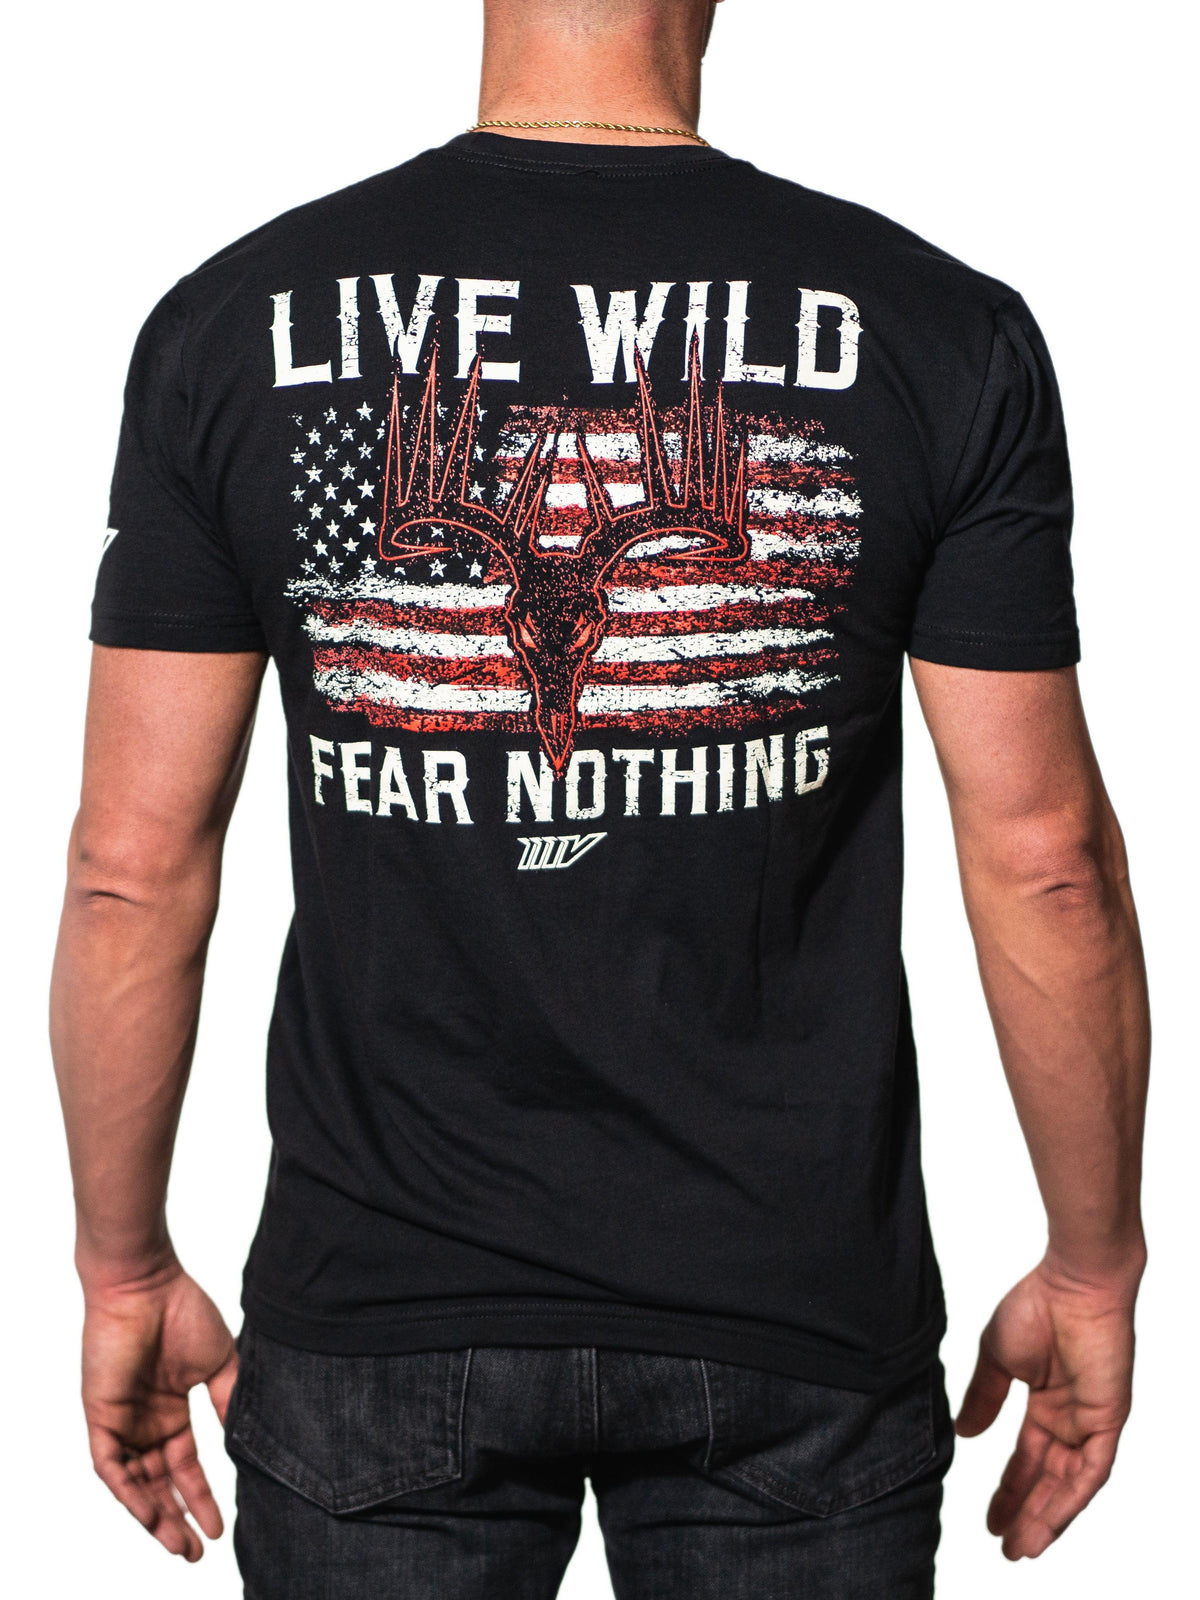 Live Wild Fear Nothing Tee